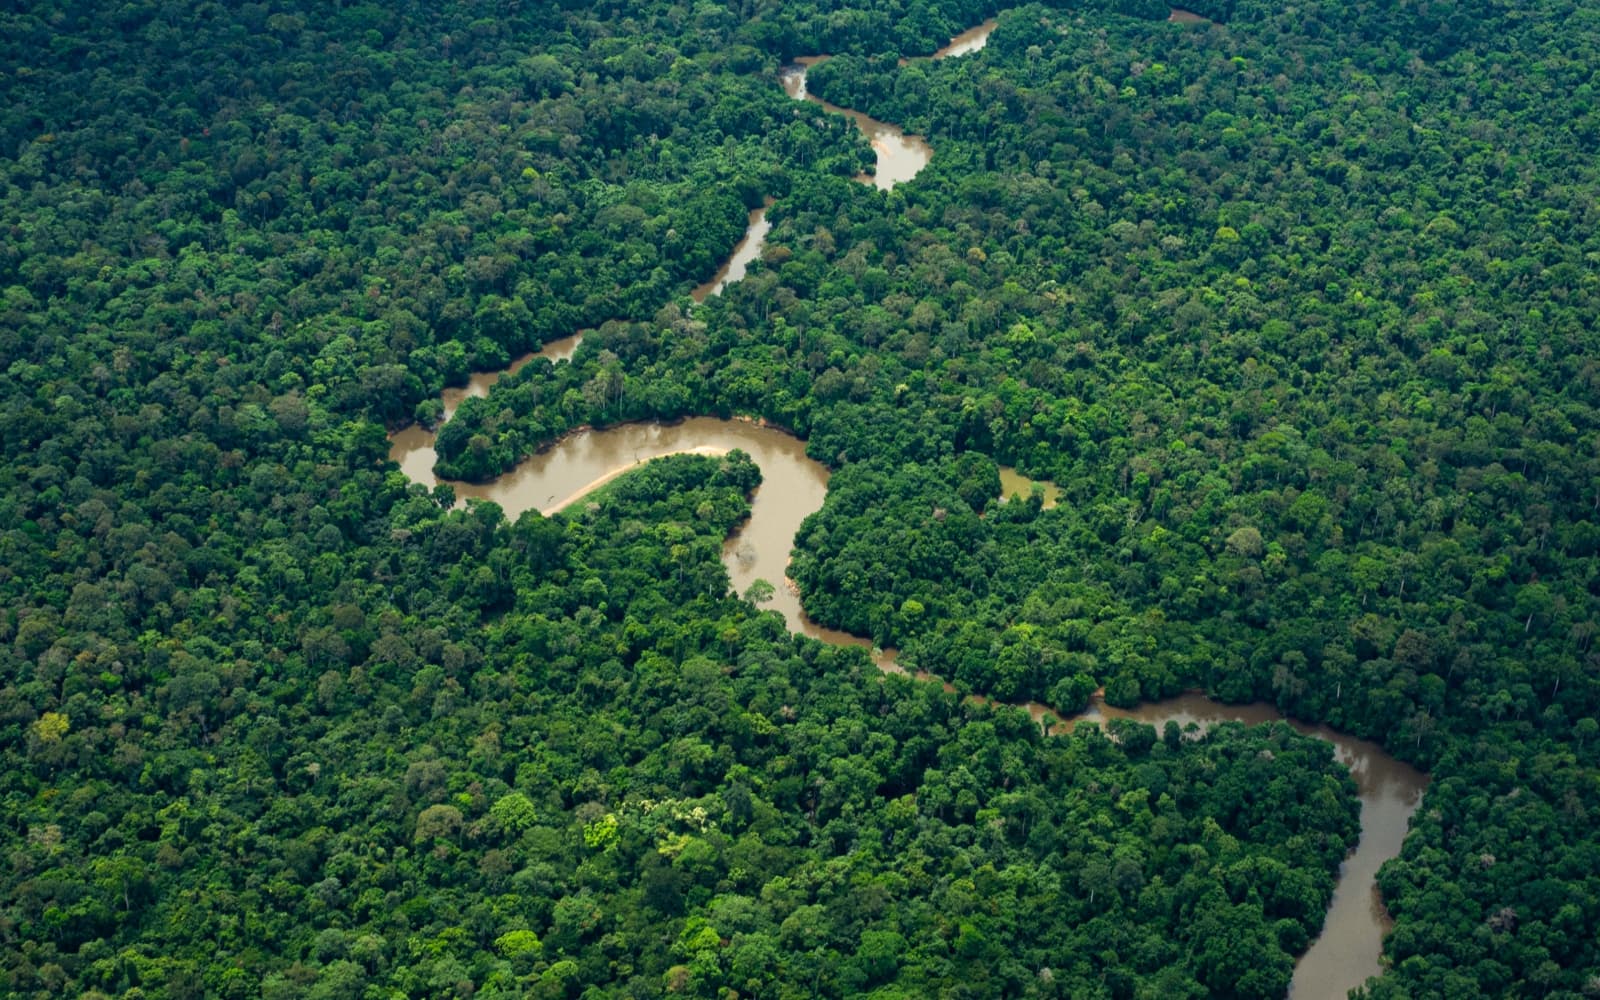 Gabon: 'Very difficult' to protect Great Congo Basin unless country rewarded for conservation efforts, minister warns